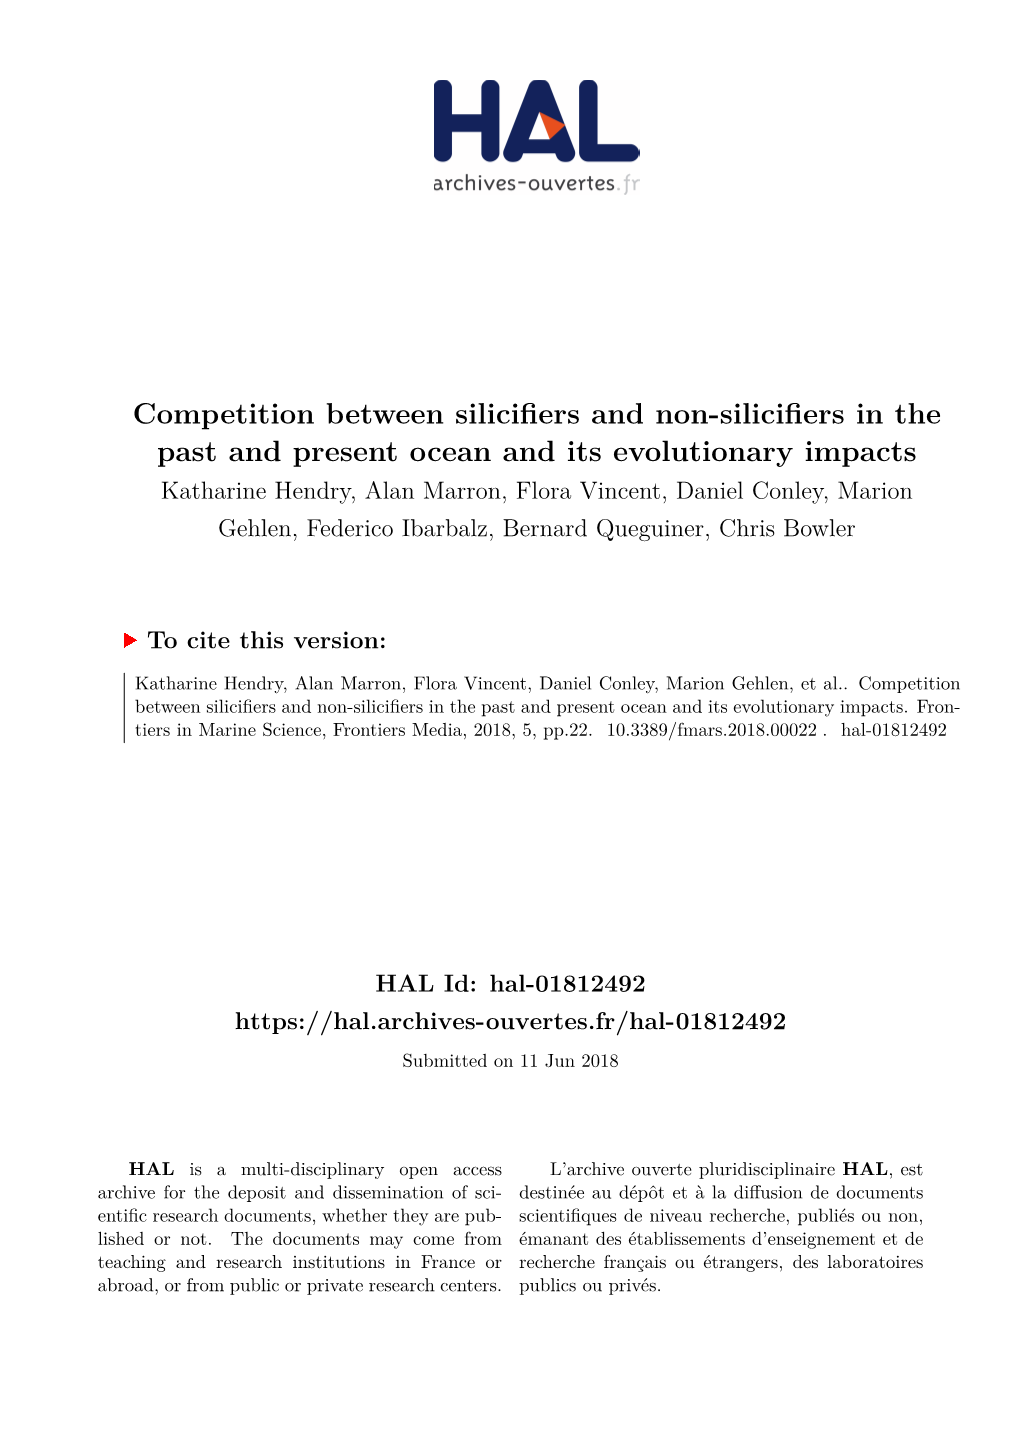 Competition Between Silicifiers and Non-Silicifiers in the Past And